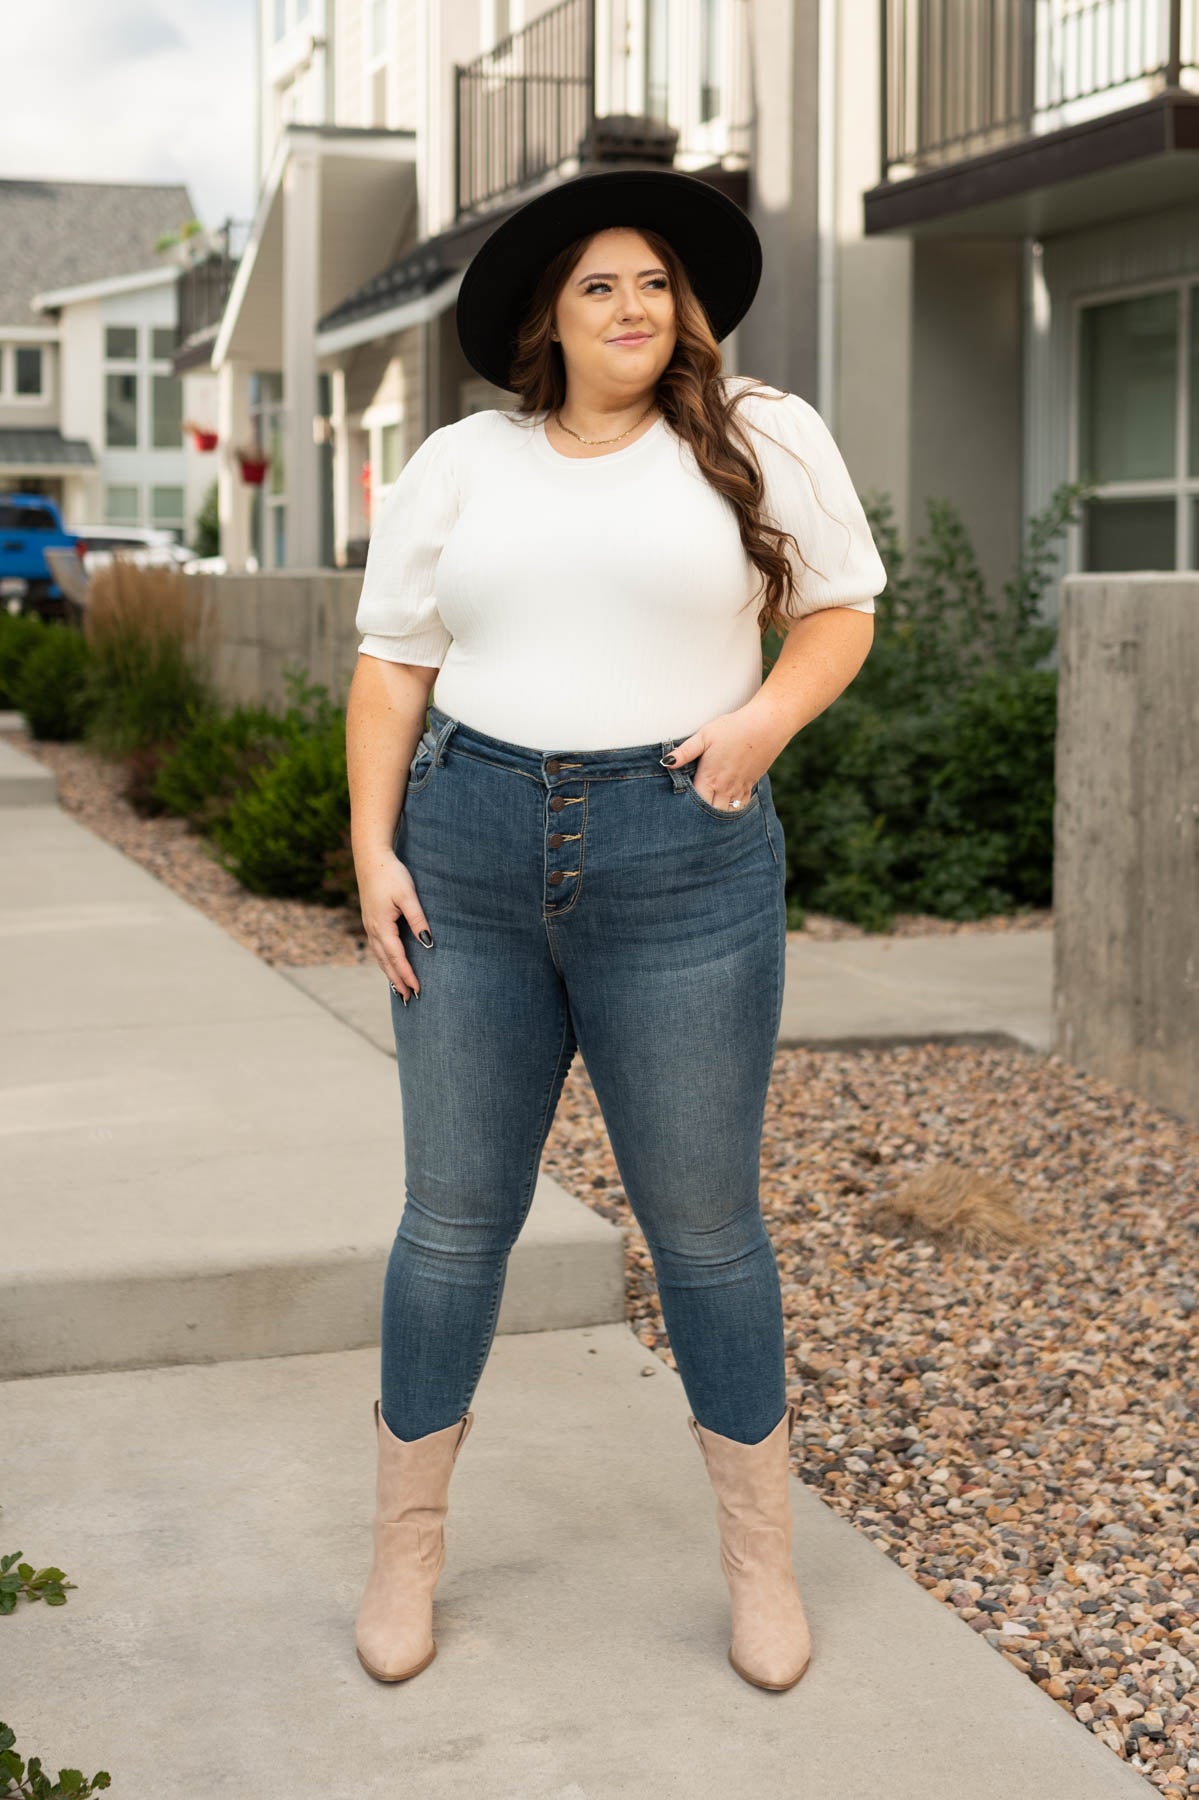 Etta White Bodysuit andthewhy Ribbed – My Sister's Closet